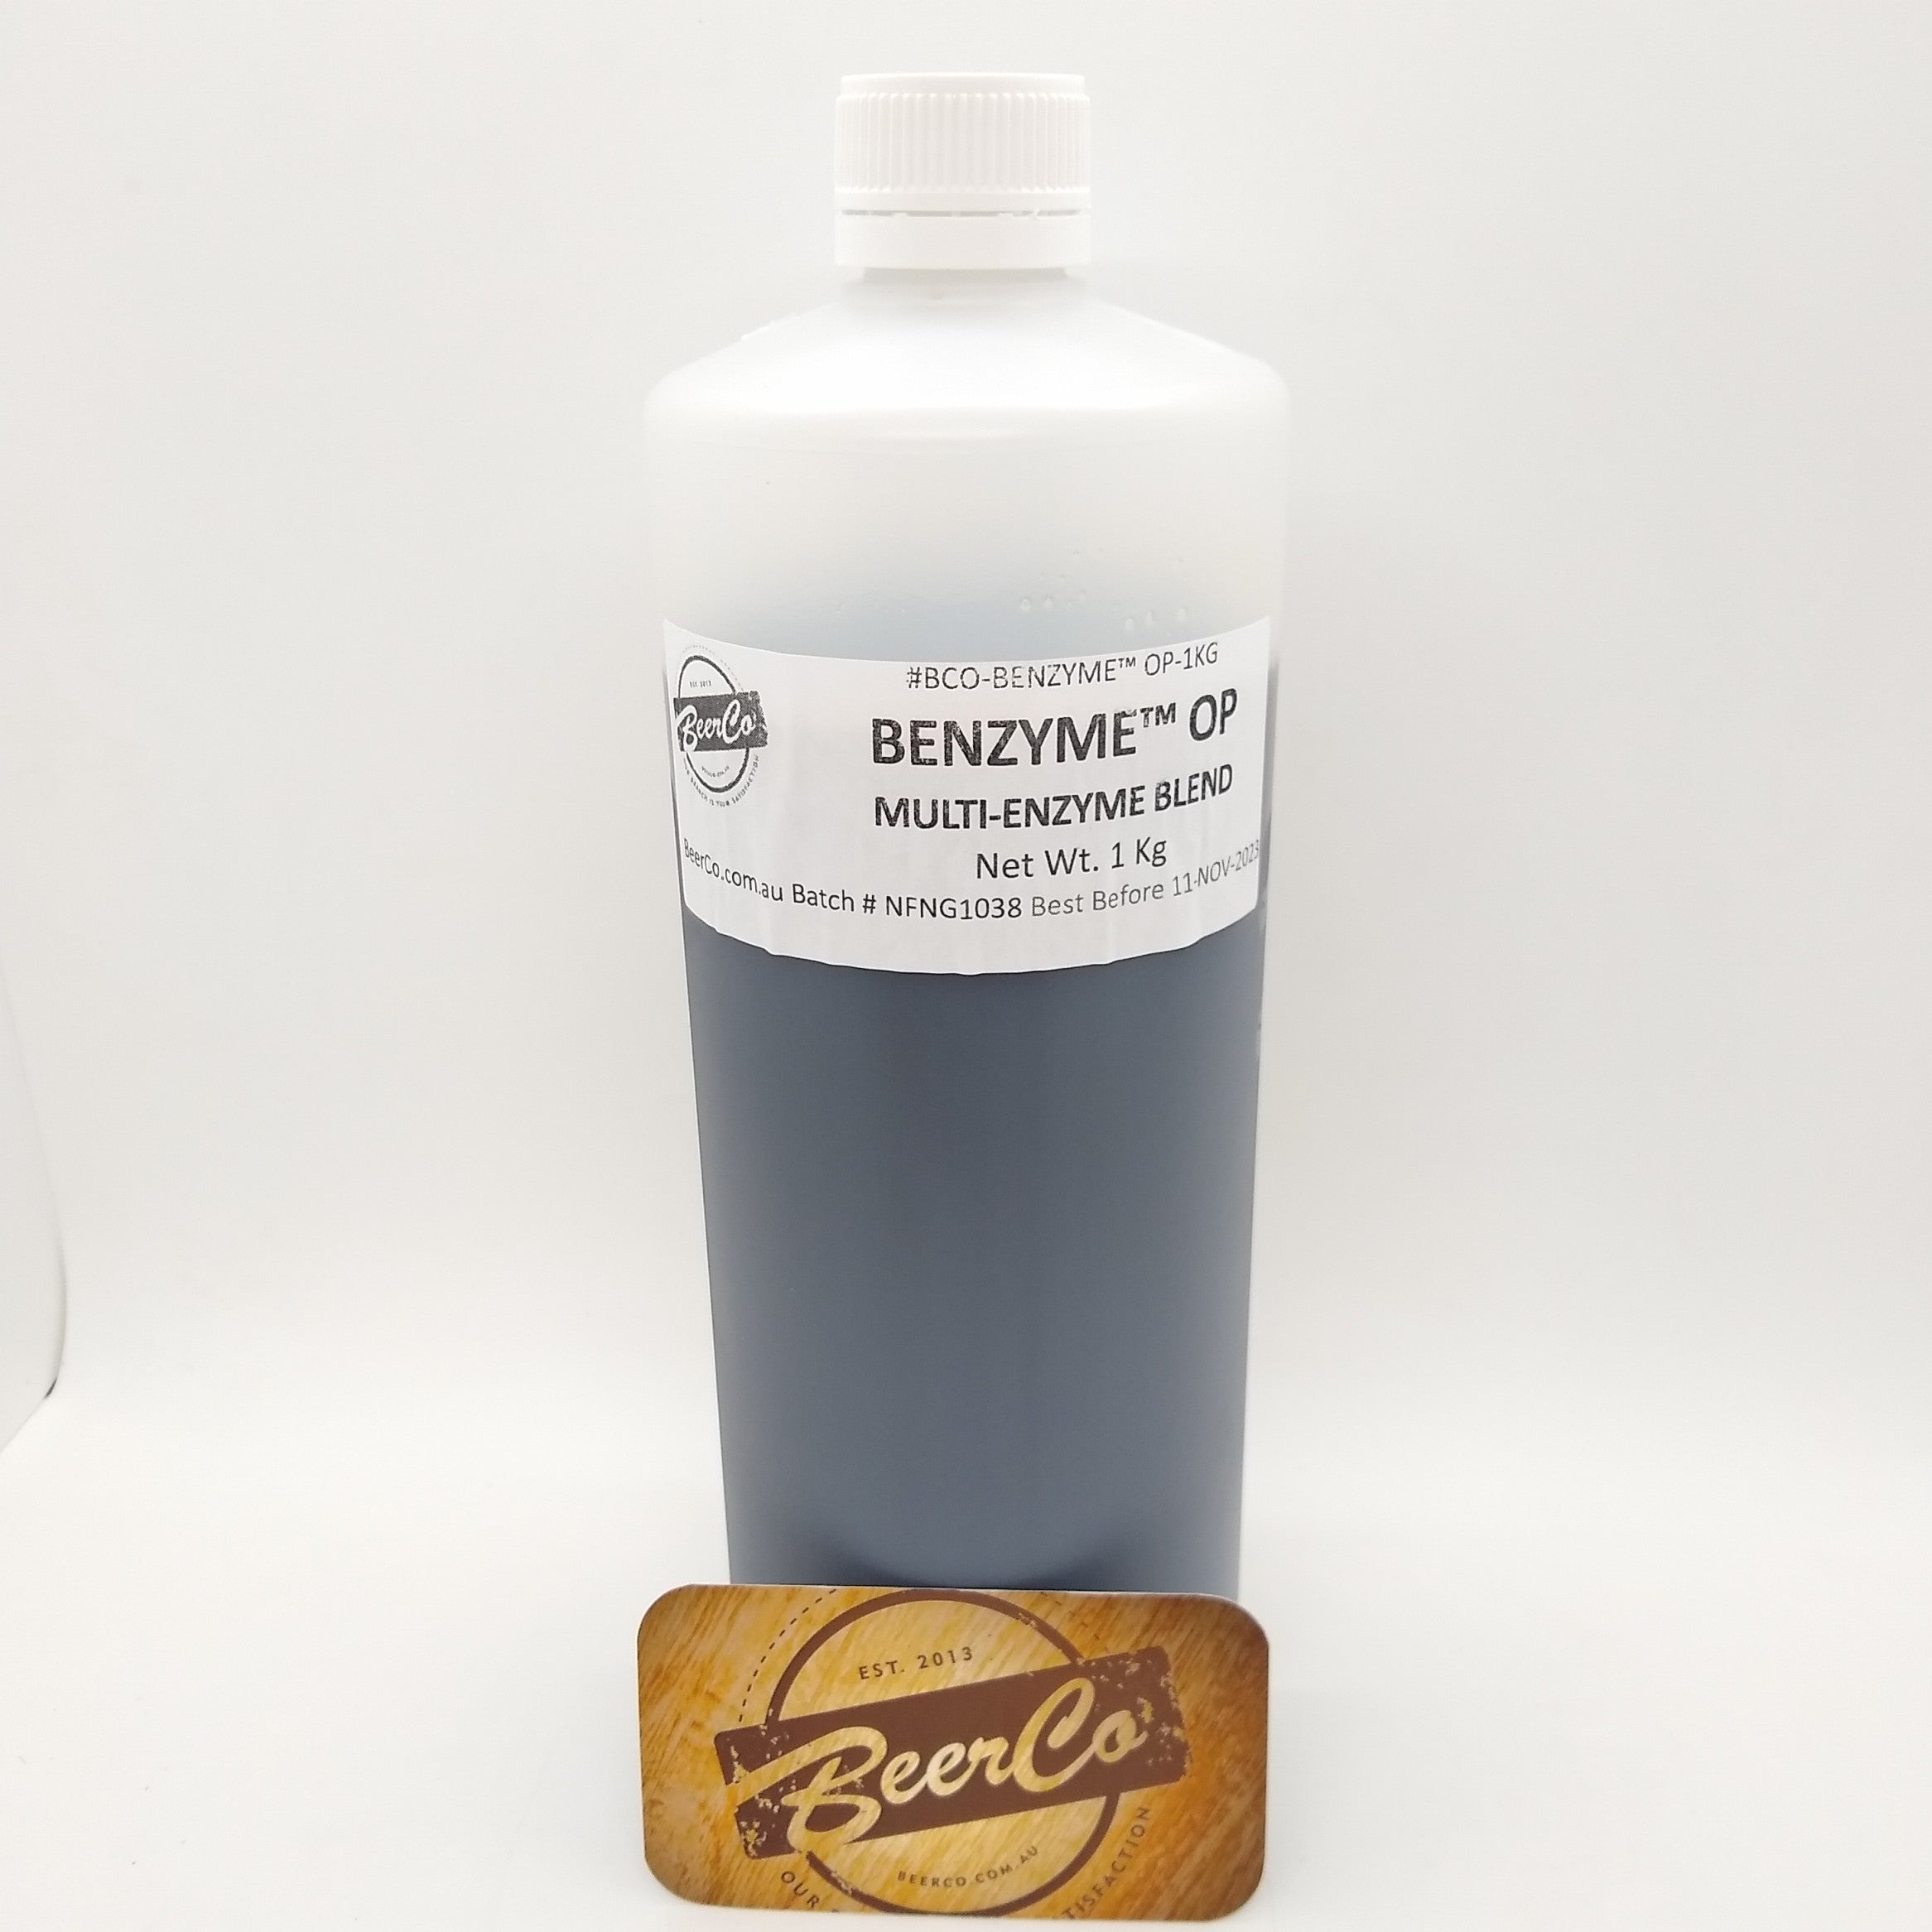 Benzyme OP - Multi-Enzyme Blend